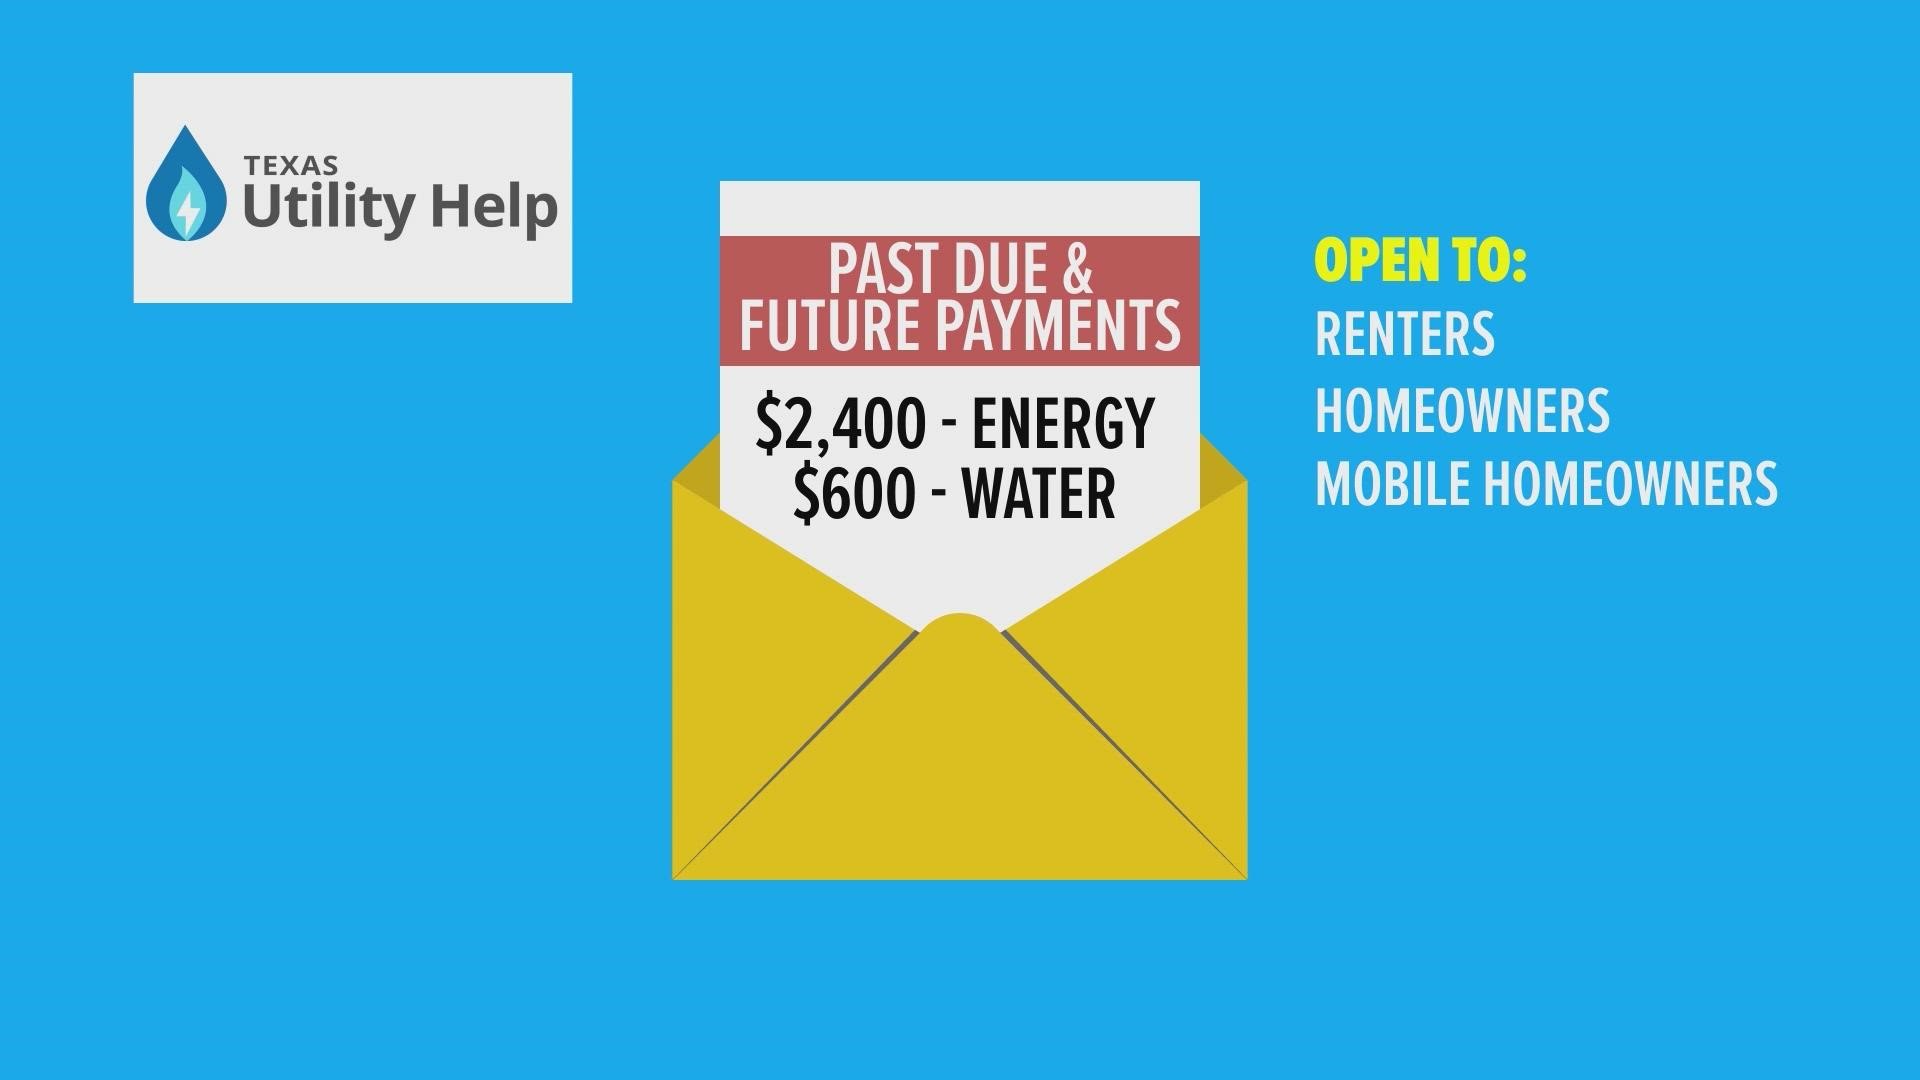 The Texas Utility Help Program will pay up to $2,000 dollars in energy bills and up to $600 in water bills.